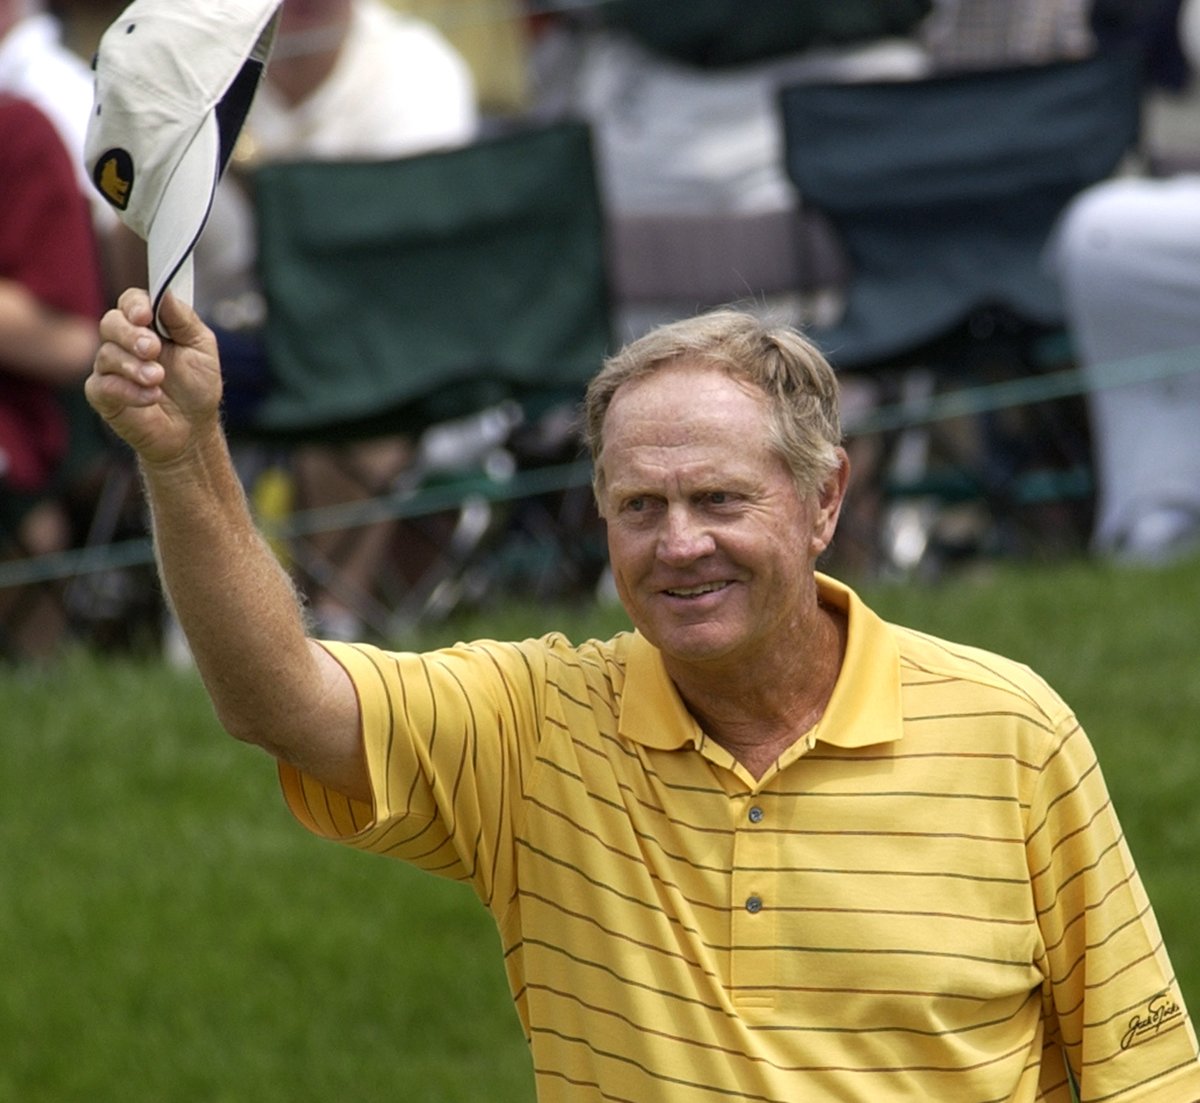 Jack Nicklaus, considered by many to be the greatest golfer of all-time, won 73 @PGATOUR events during his Hall of Fame career. But...did you know...the VERY FIRST victory of his career could have been here in #Htown - if not for a blunder by his caddie? A brief thread...